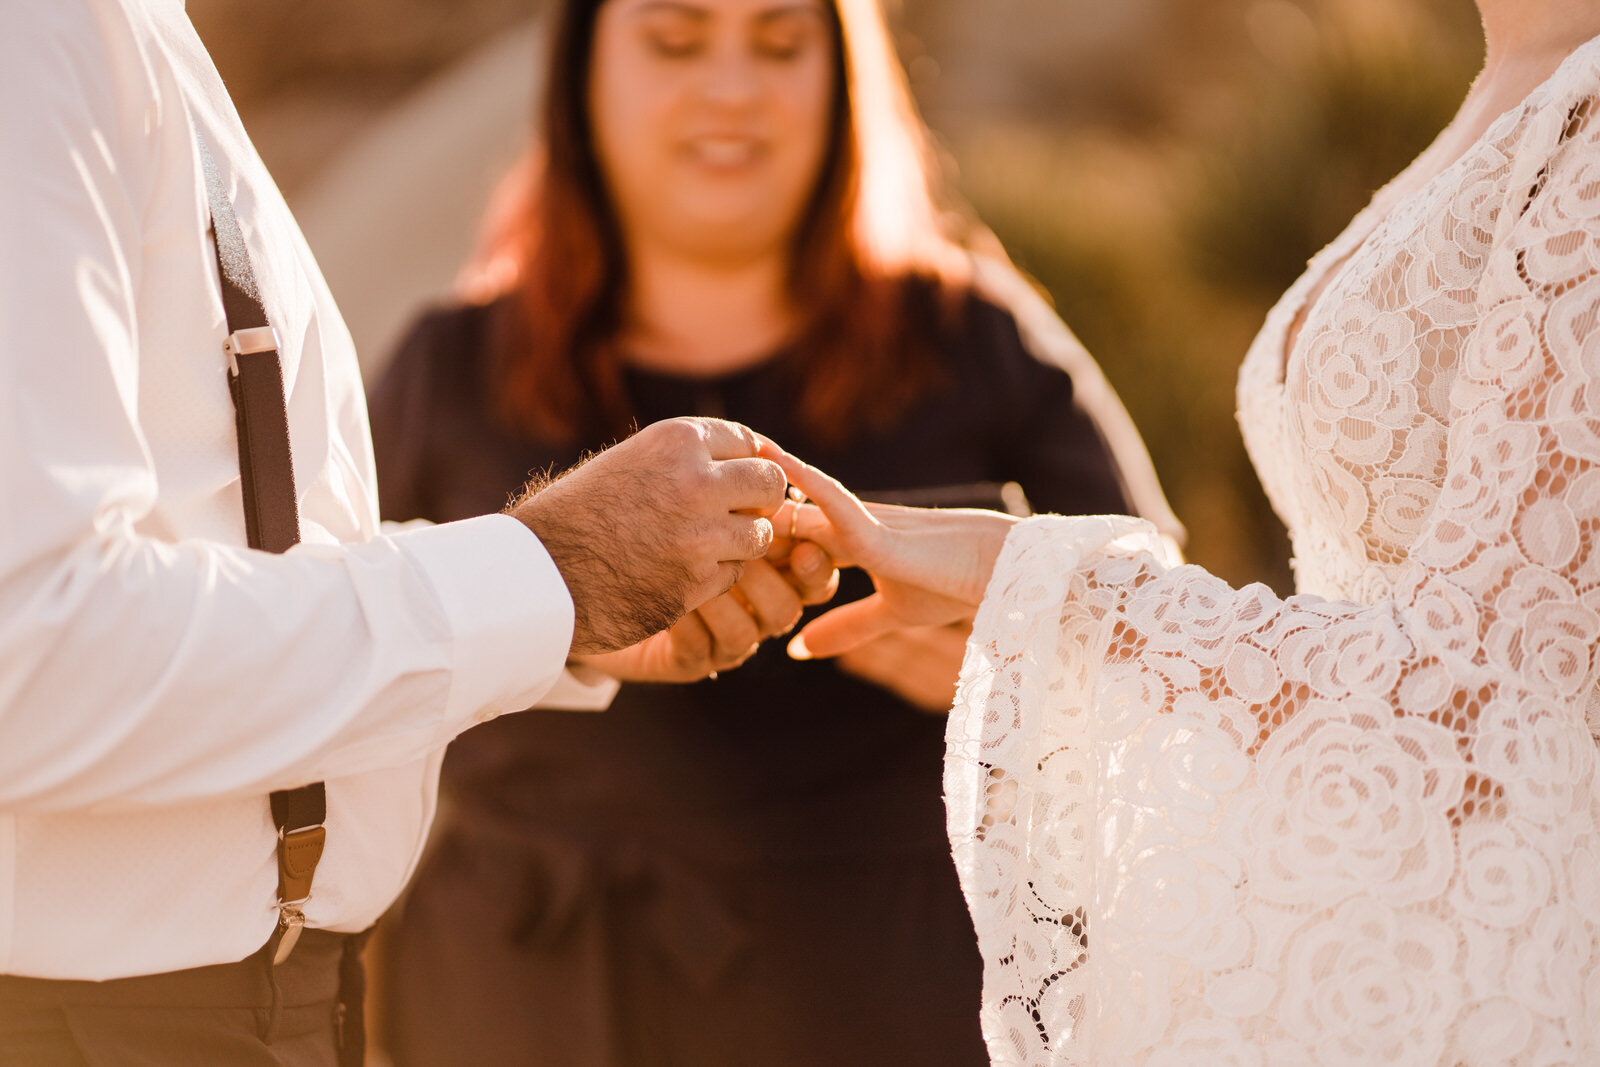 Groom places ring on bride's finger during elopement ceremony in Joshua Tree National Park | adventurous, fun, warm wedding photos by Kept Record | www.keptrecord.com